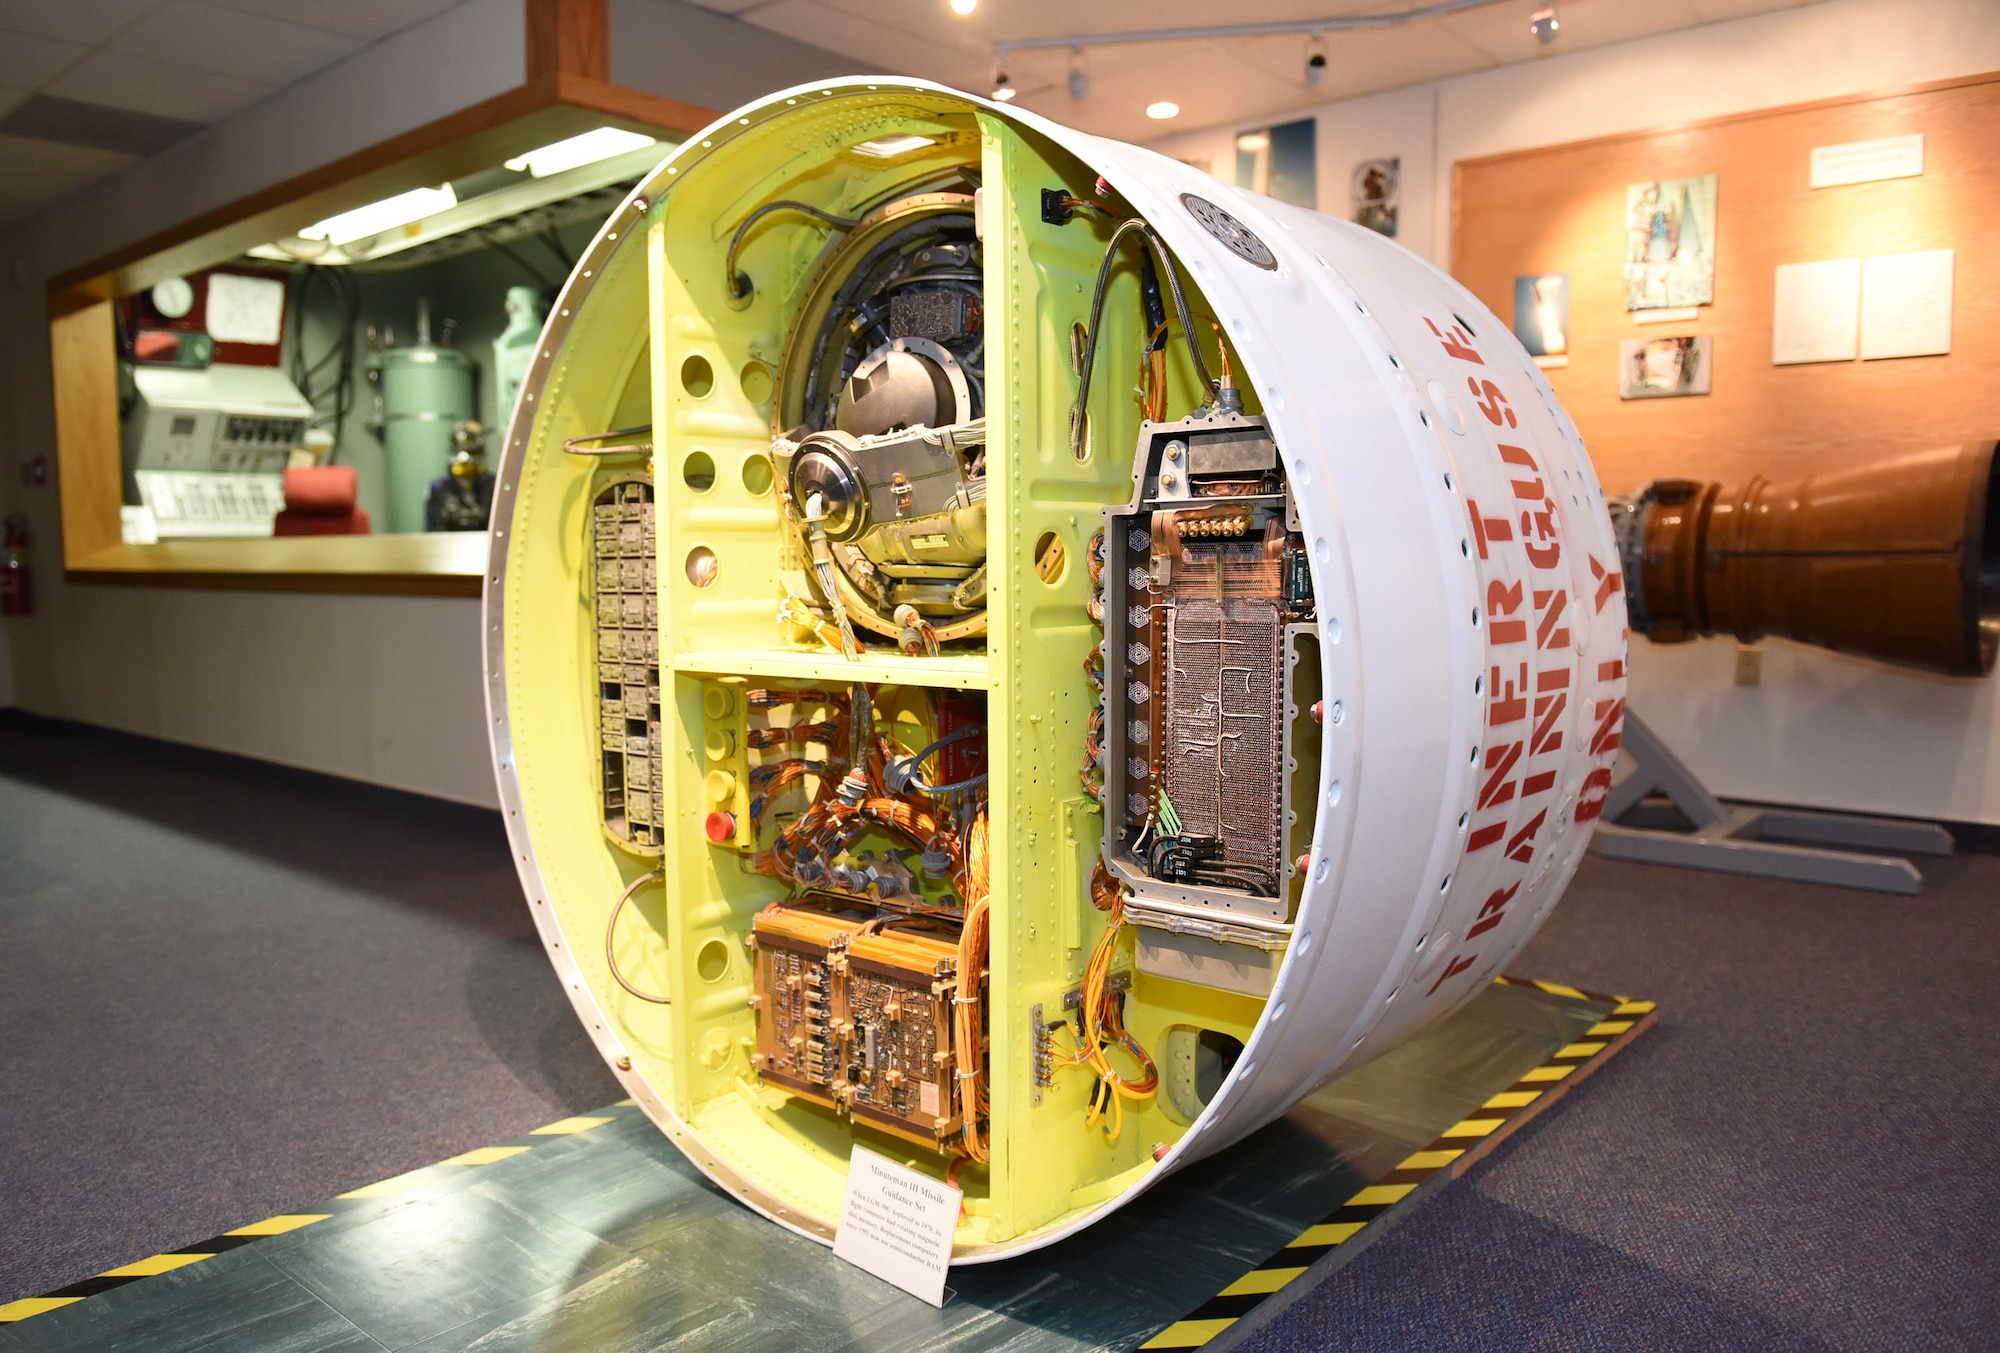 A Minuteman III missile guidance assembly is one of many exhibits on display at the Malmstrom Exhibit and Air Park at Malmstrom Air Force Base, Mont.  The museum contains more than 400 items on display that depict the history of Malmstrom and the Minuteman missile program.  (Air Force photo/Jason Heavner)